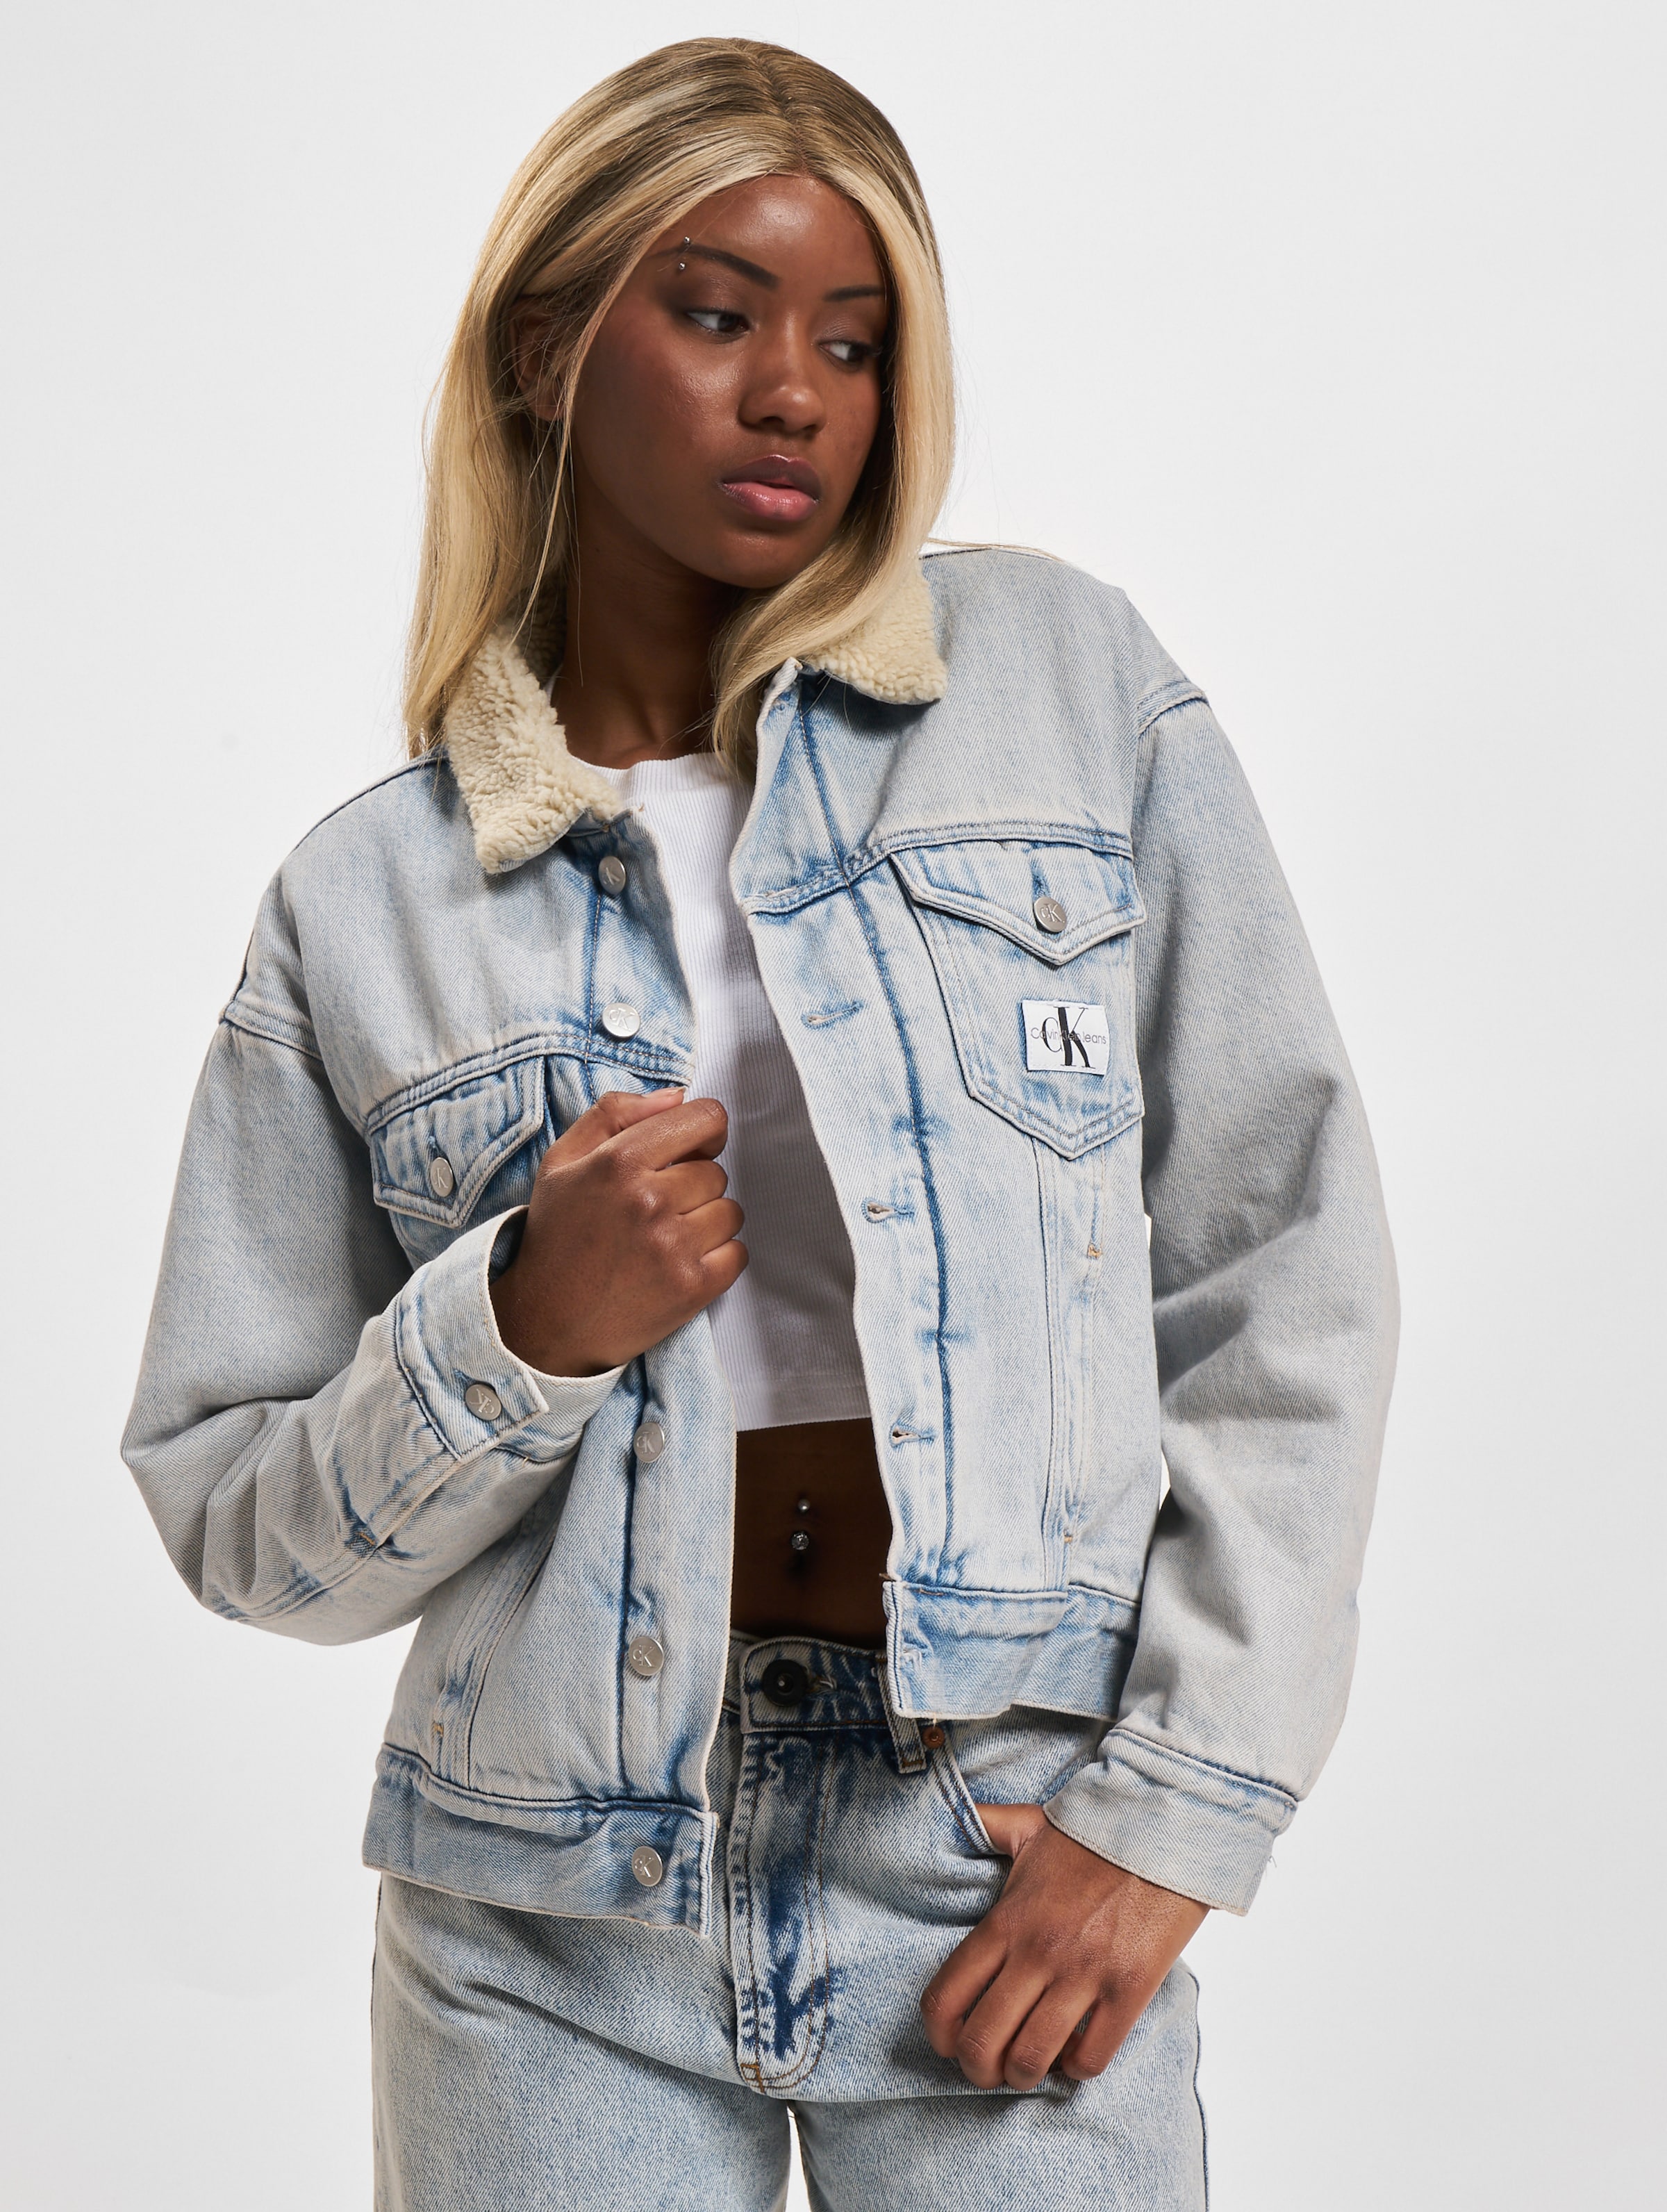 Women's Sherpa Jackets, Pullovers, and Much More | Wrangler®